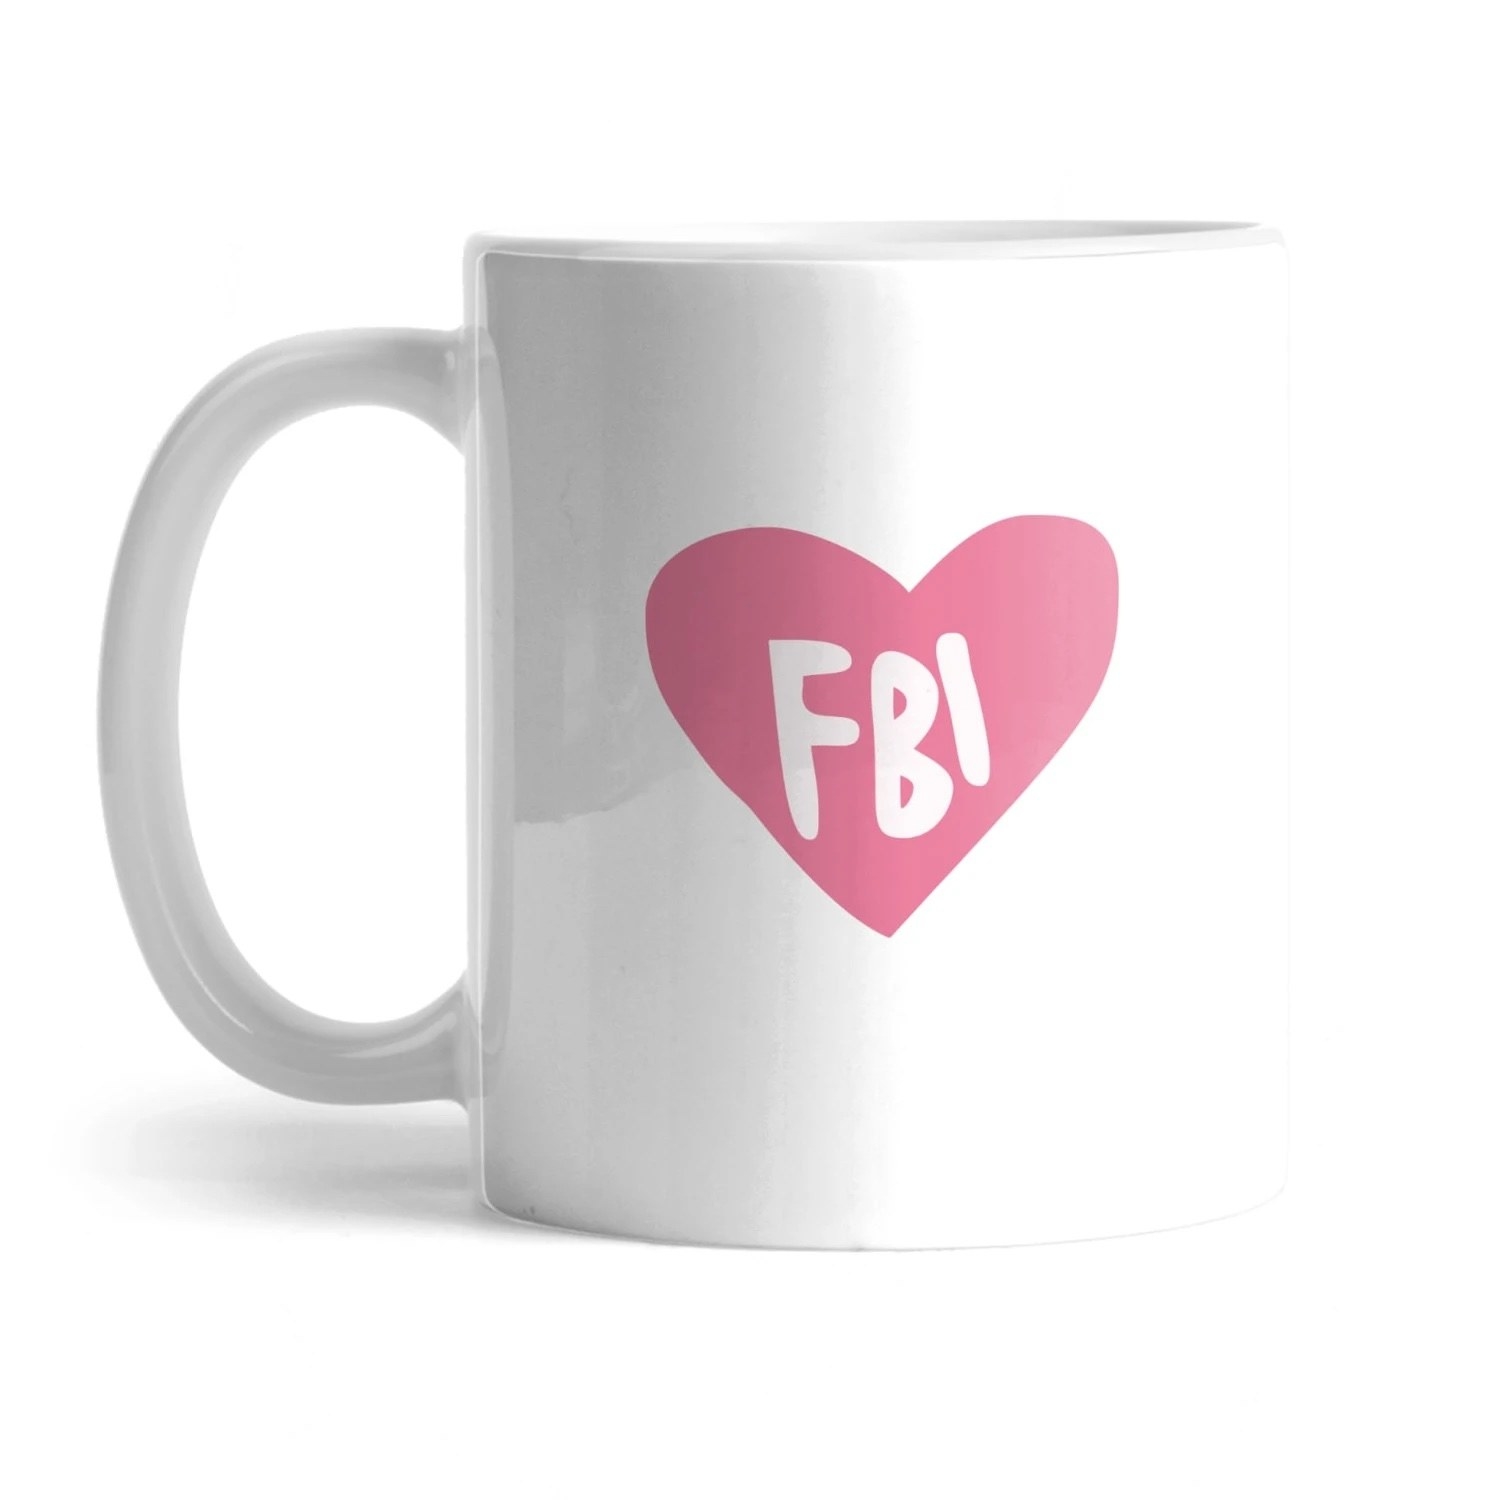 a mug that has a pink heart on it that says FBI